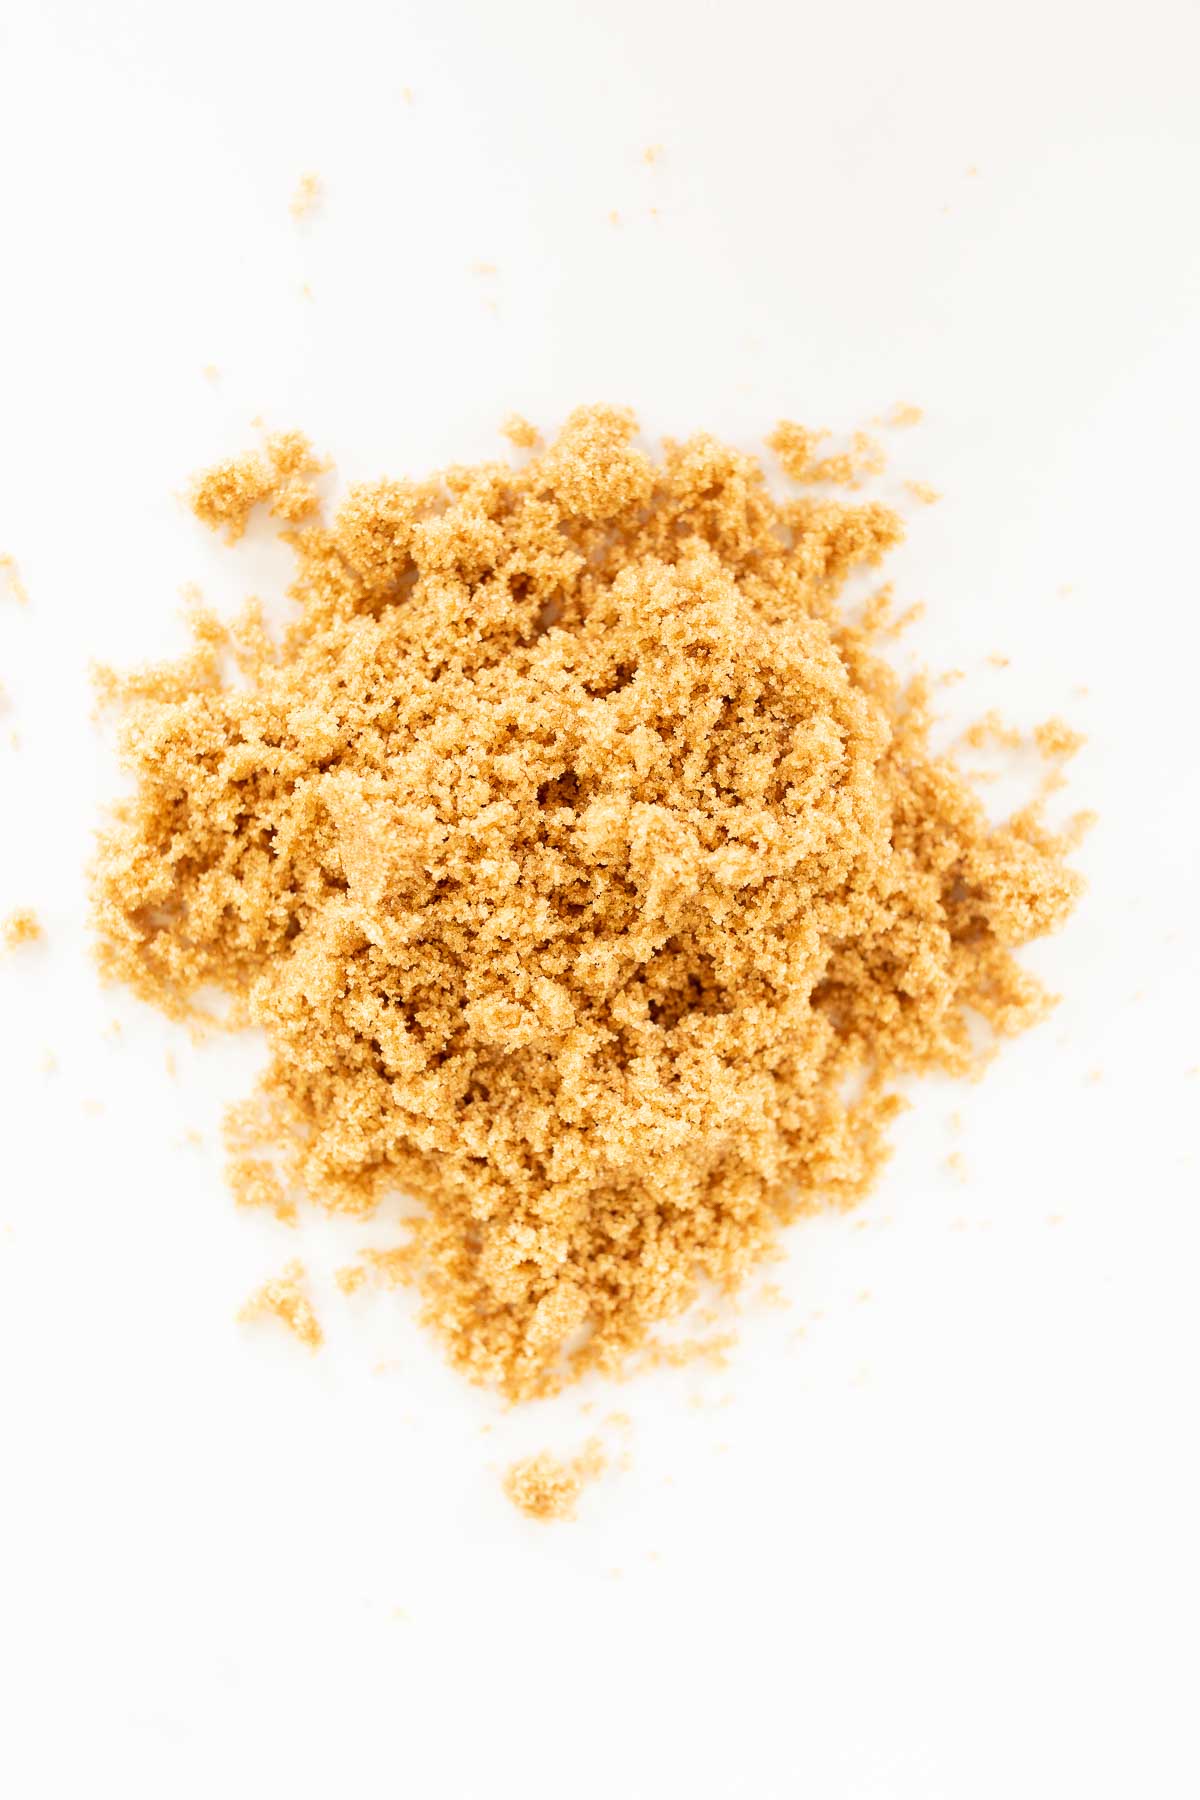 Dark brown sugar scattered on a white surface.